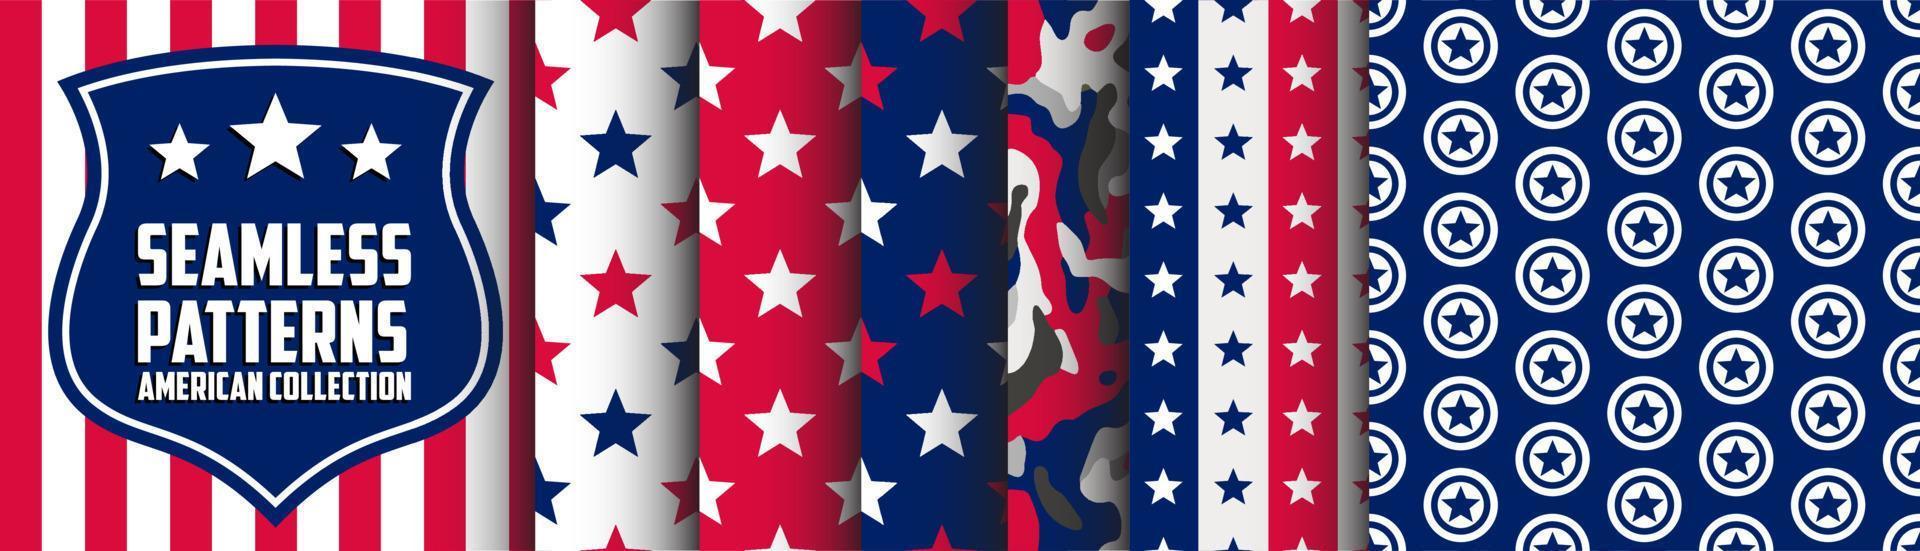 Seamless Patterns American Collection. Stars and stripes made in USA. Set of 4th July designs. Graphics made for print and apparel. Labor backgrounds collection. vector